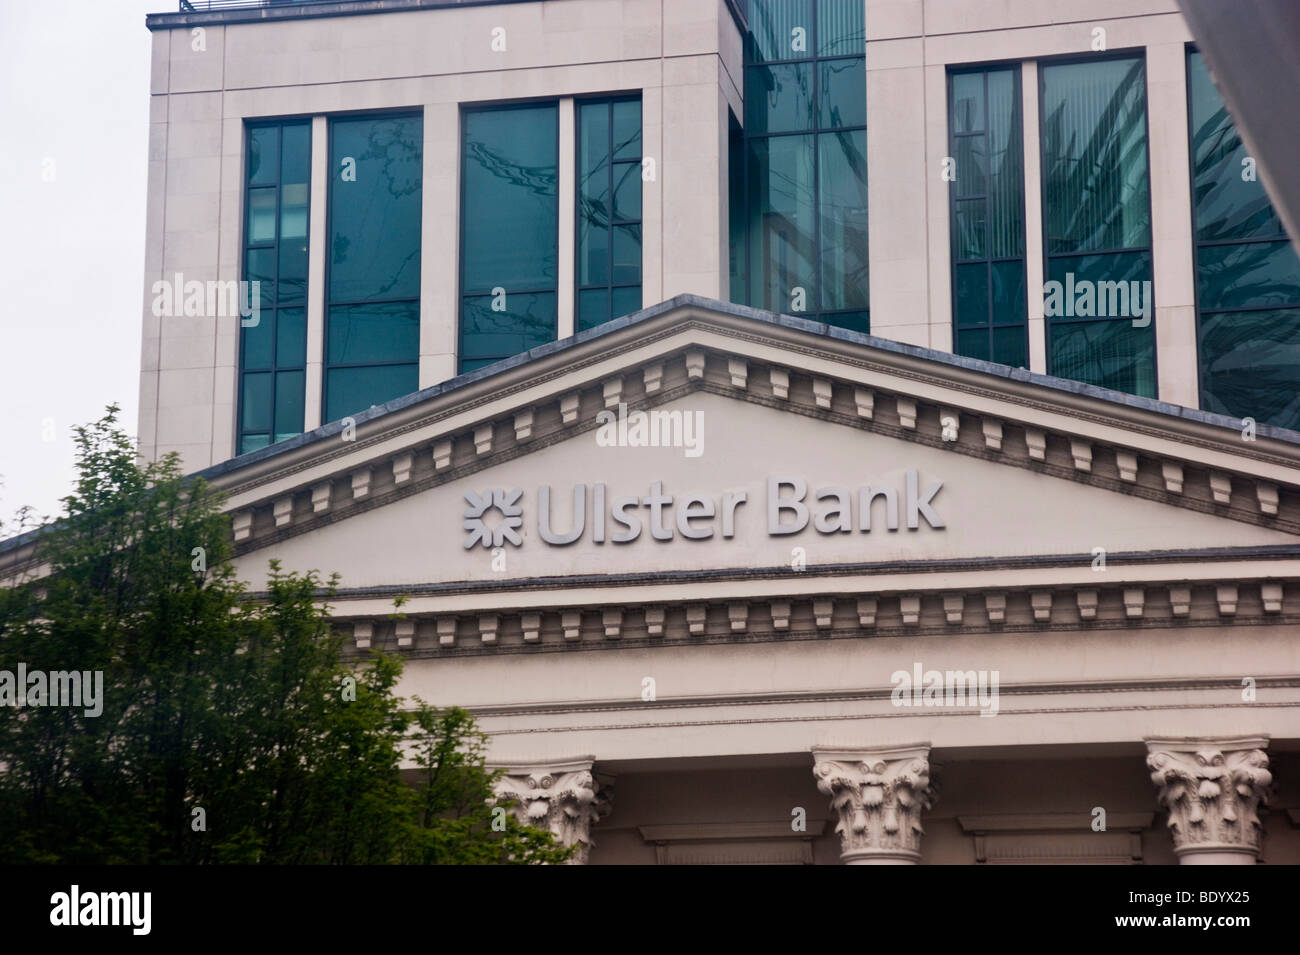 The Ulster Bank Belfast - sign Stock Photo